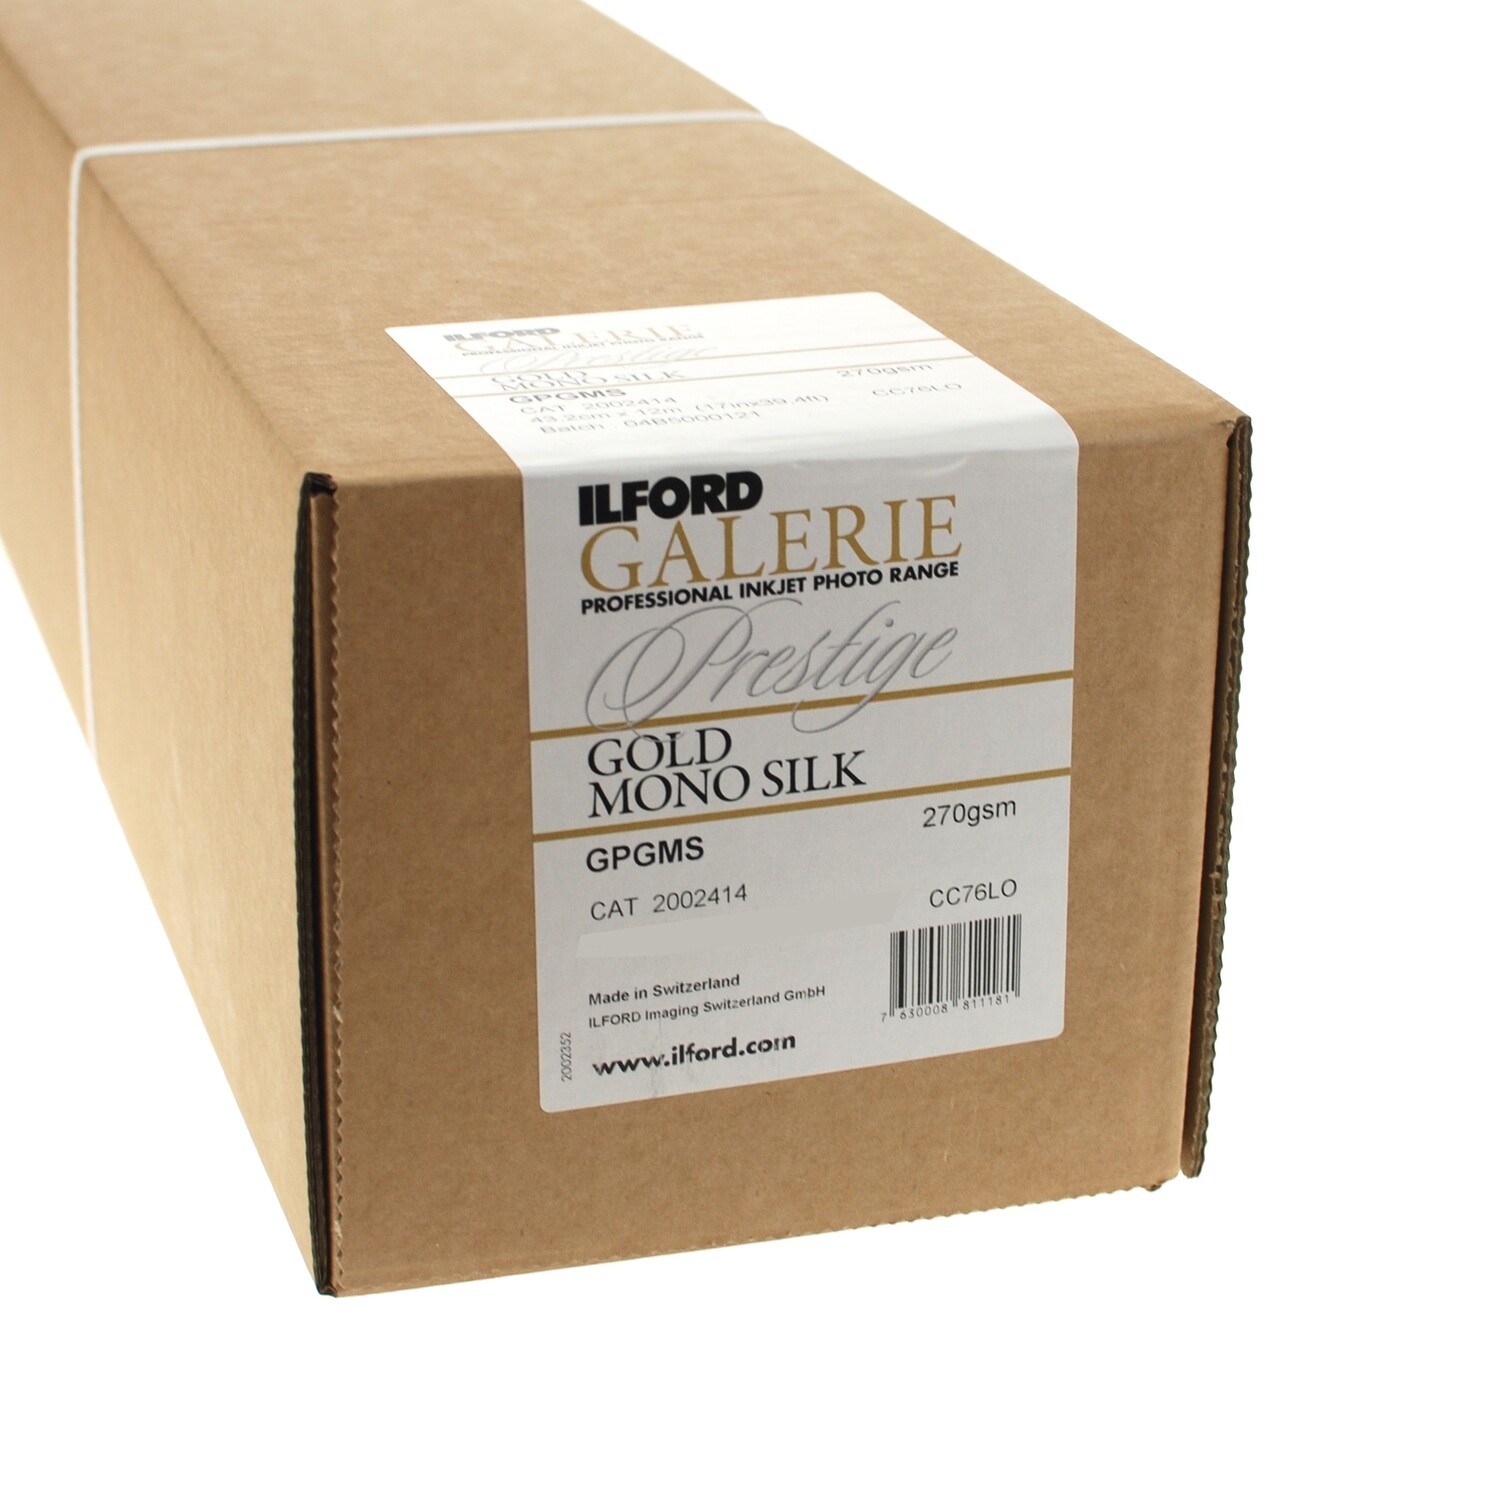 ILFORD GALERIE GOLD MONO SILK (270g) Rolle - Rolle 43,2x1200 CM (17Inchx39,4ft)